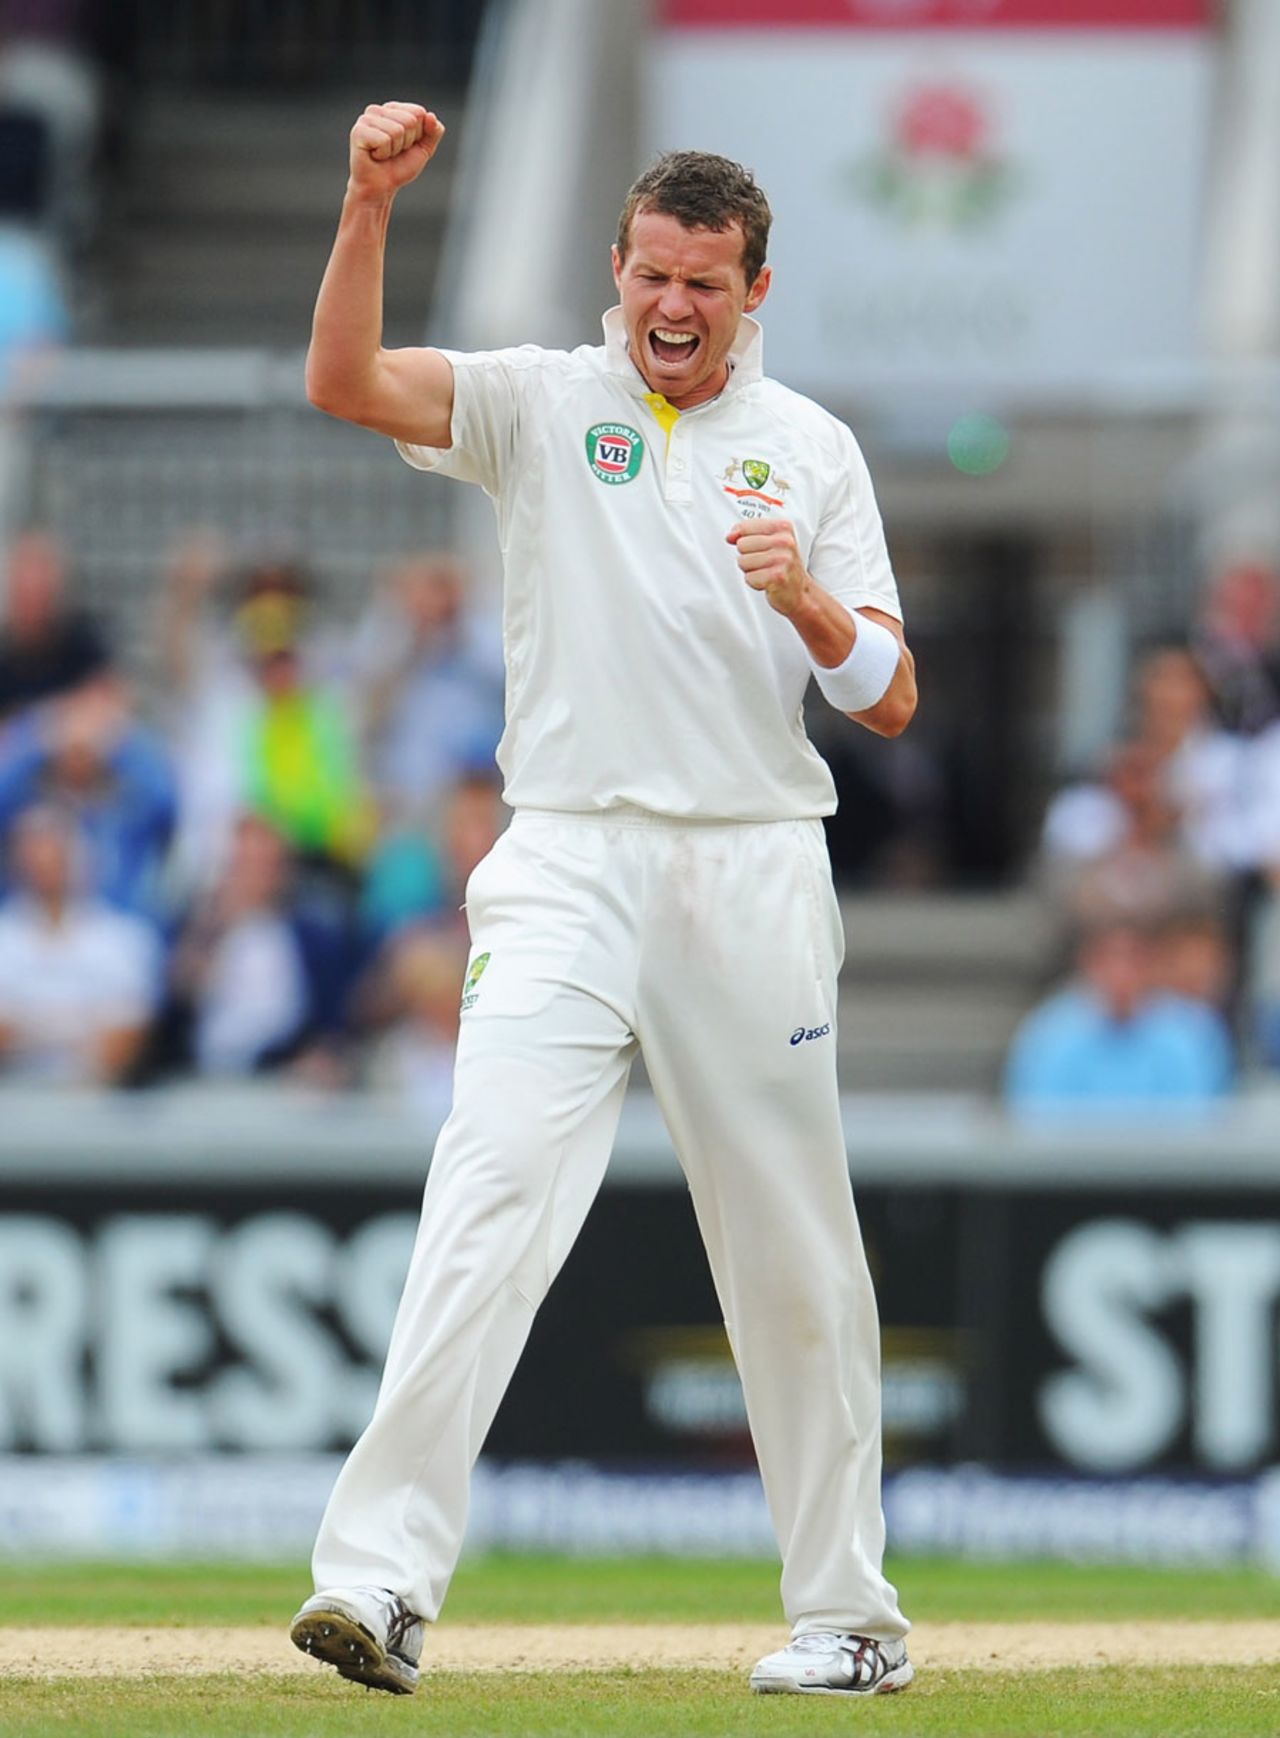 Peter Siddle celebrates Kevin Pietersen's wicket, England v Australia, 3rd Investec Test, Old Trafford, 5th day, August 5, 2013